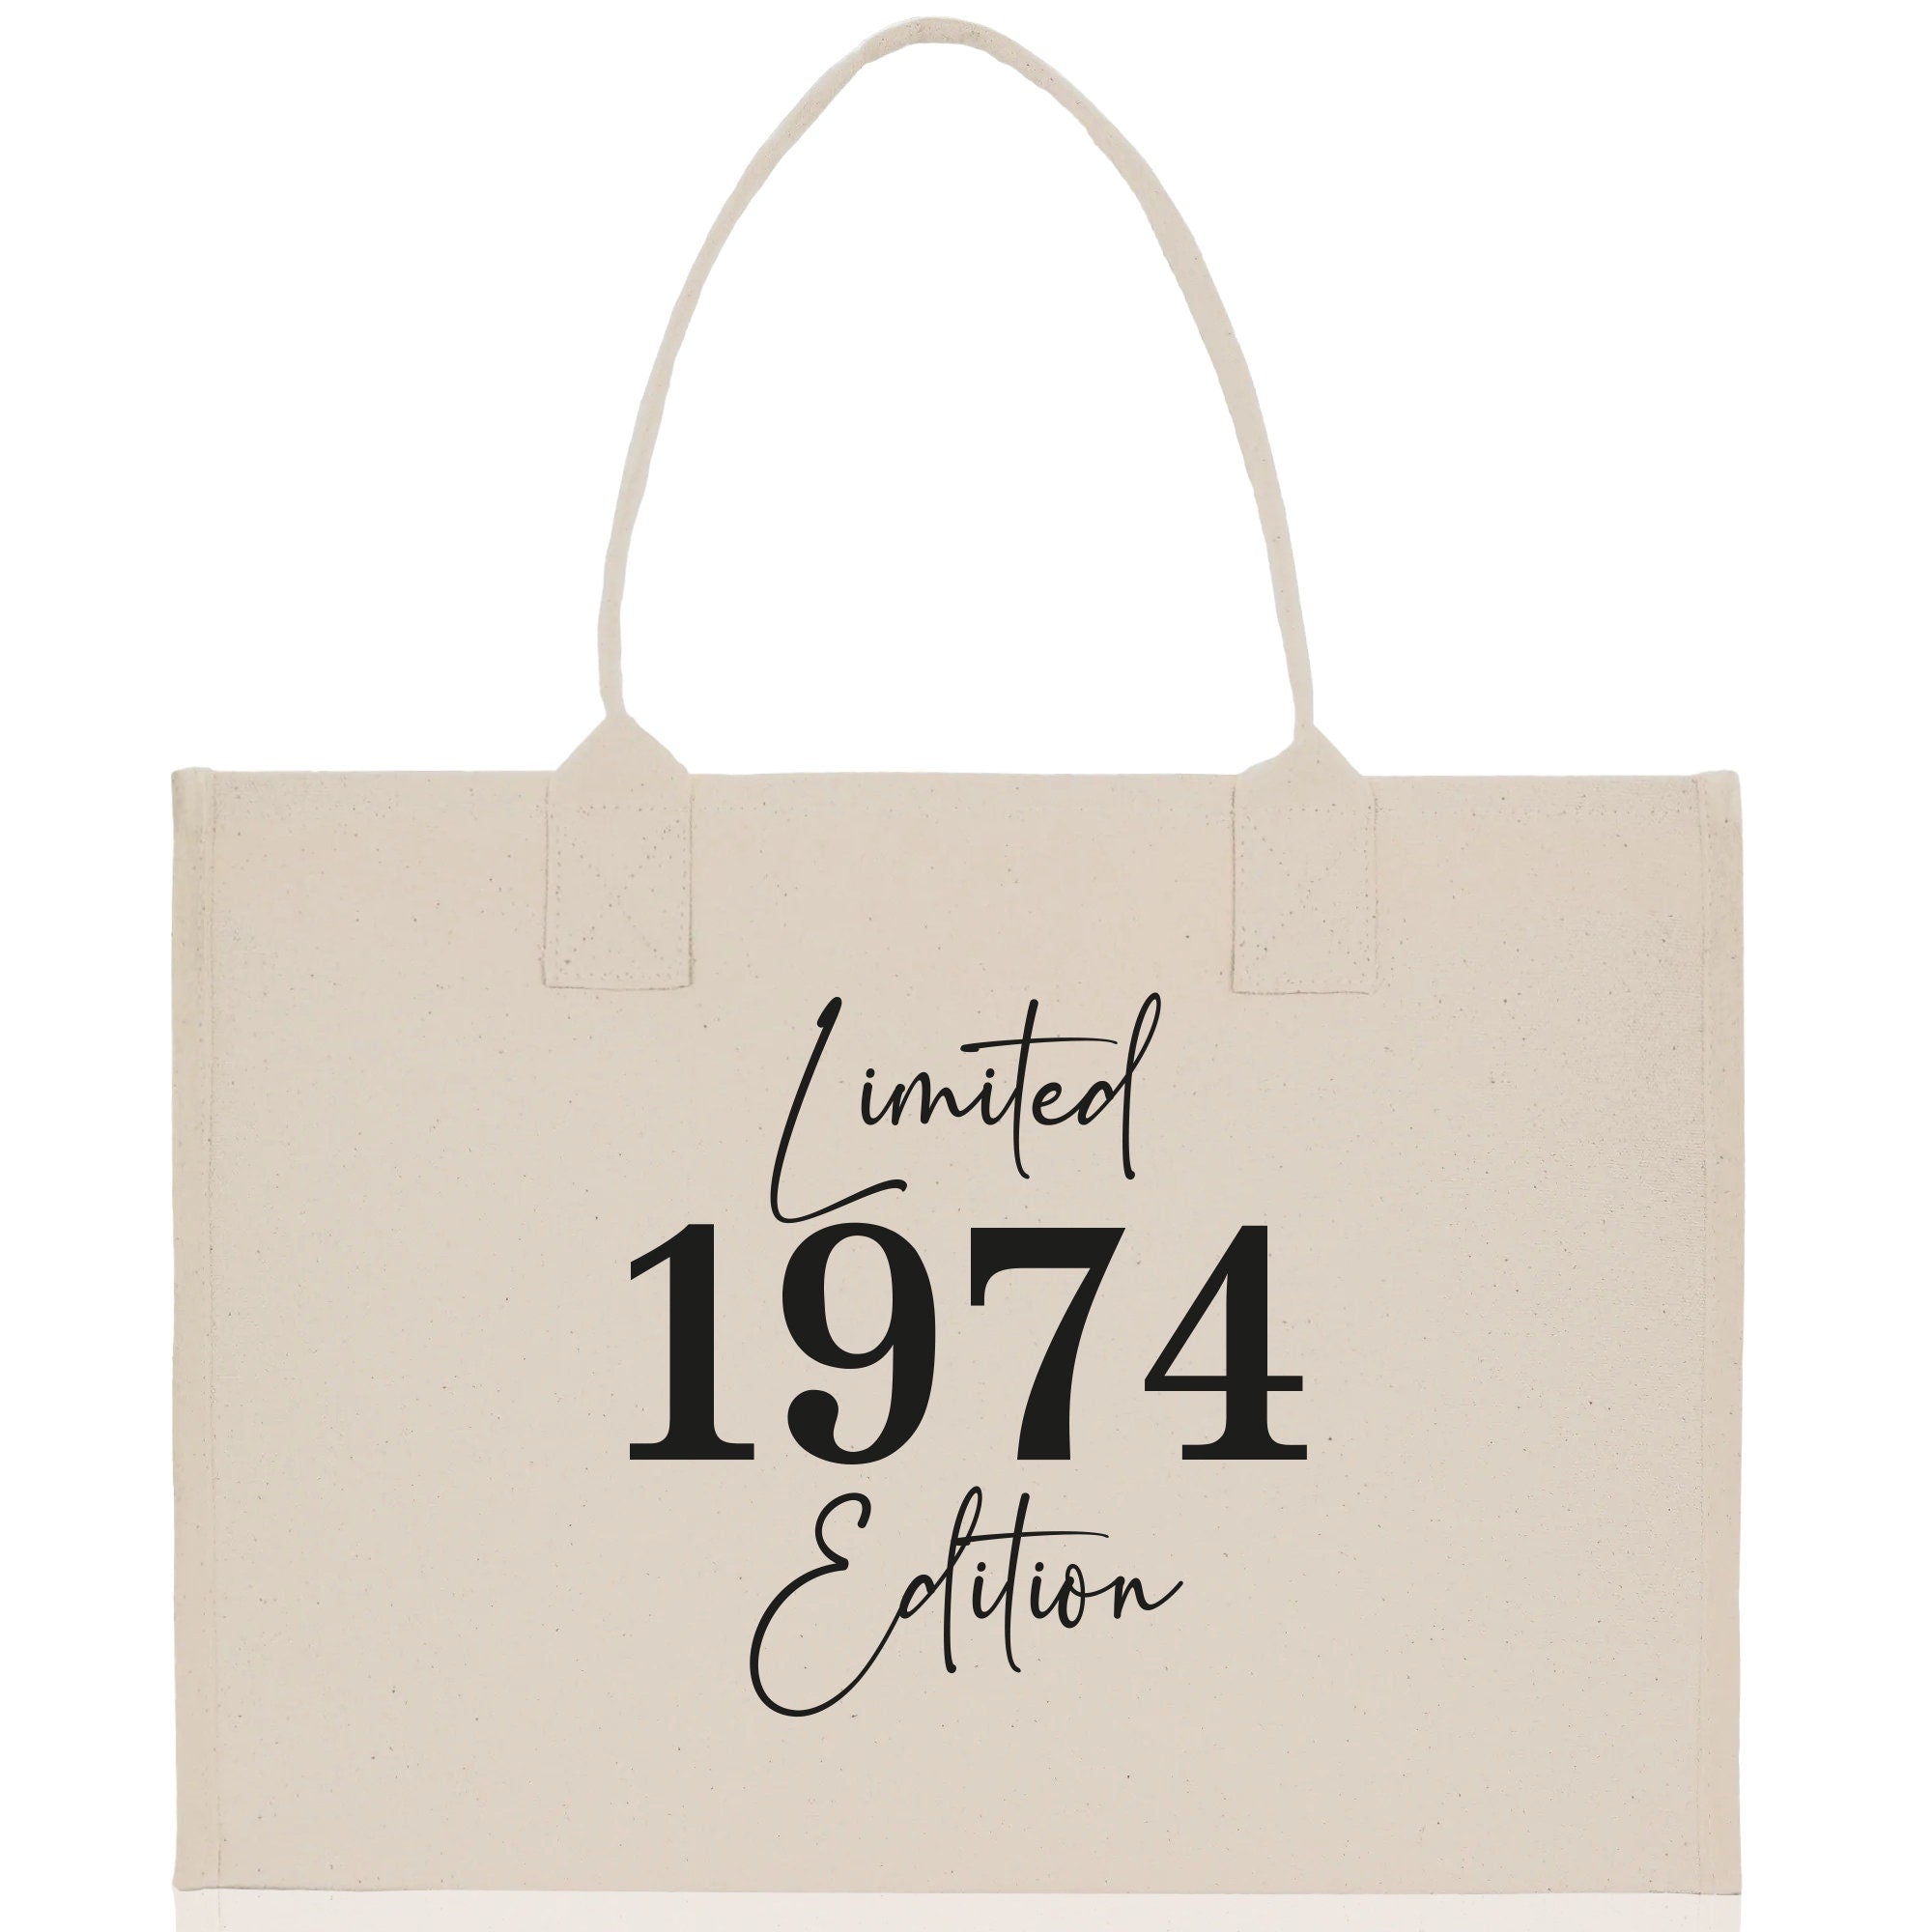 a shopping bag with the words united 1974 written on it